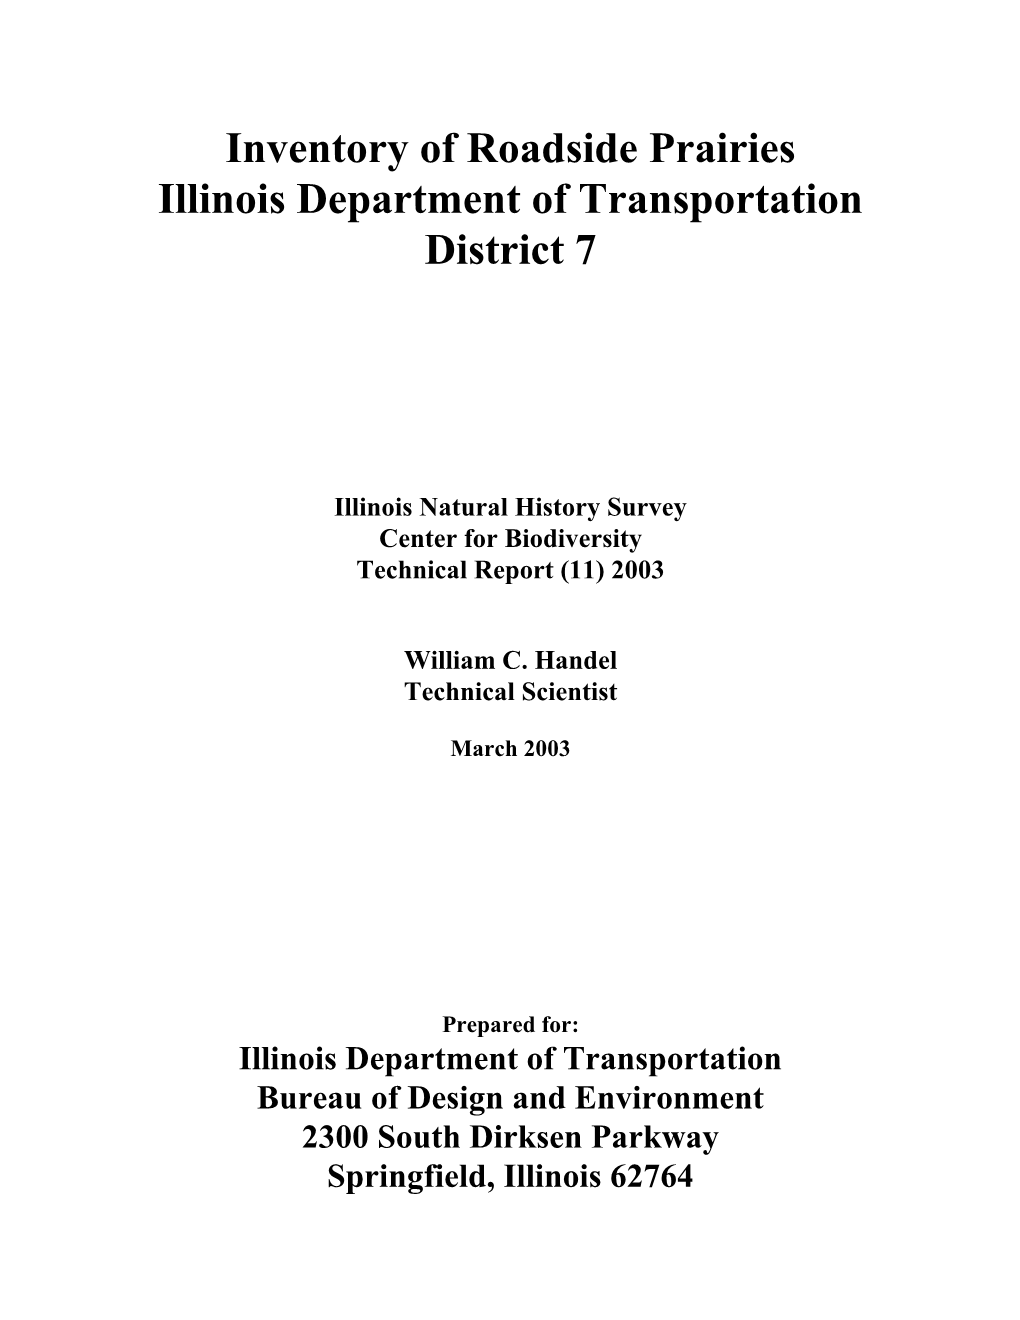 Inventory of Roadside Prairies Illinois Department of Transportation District 7